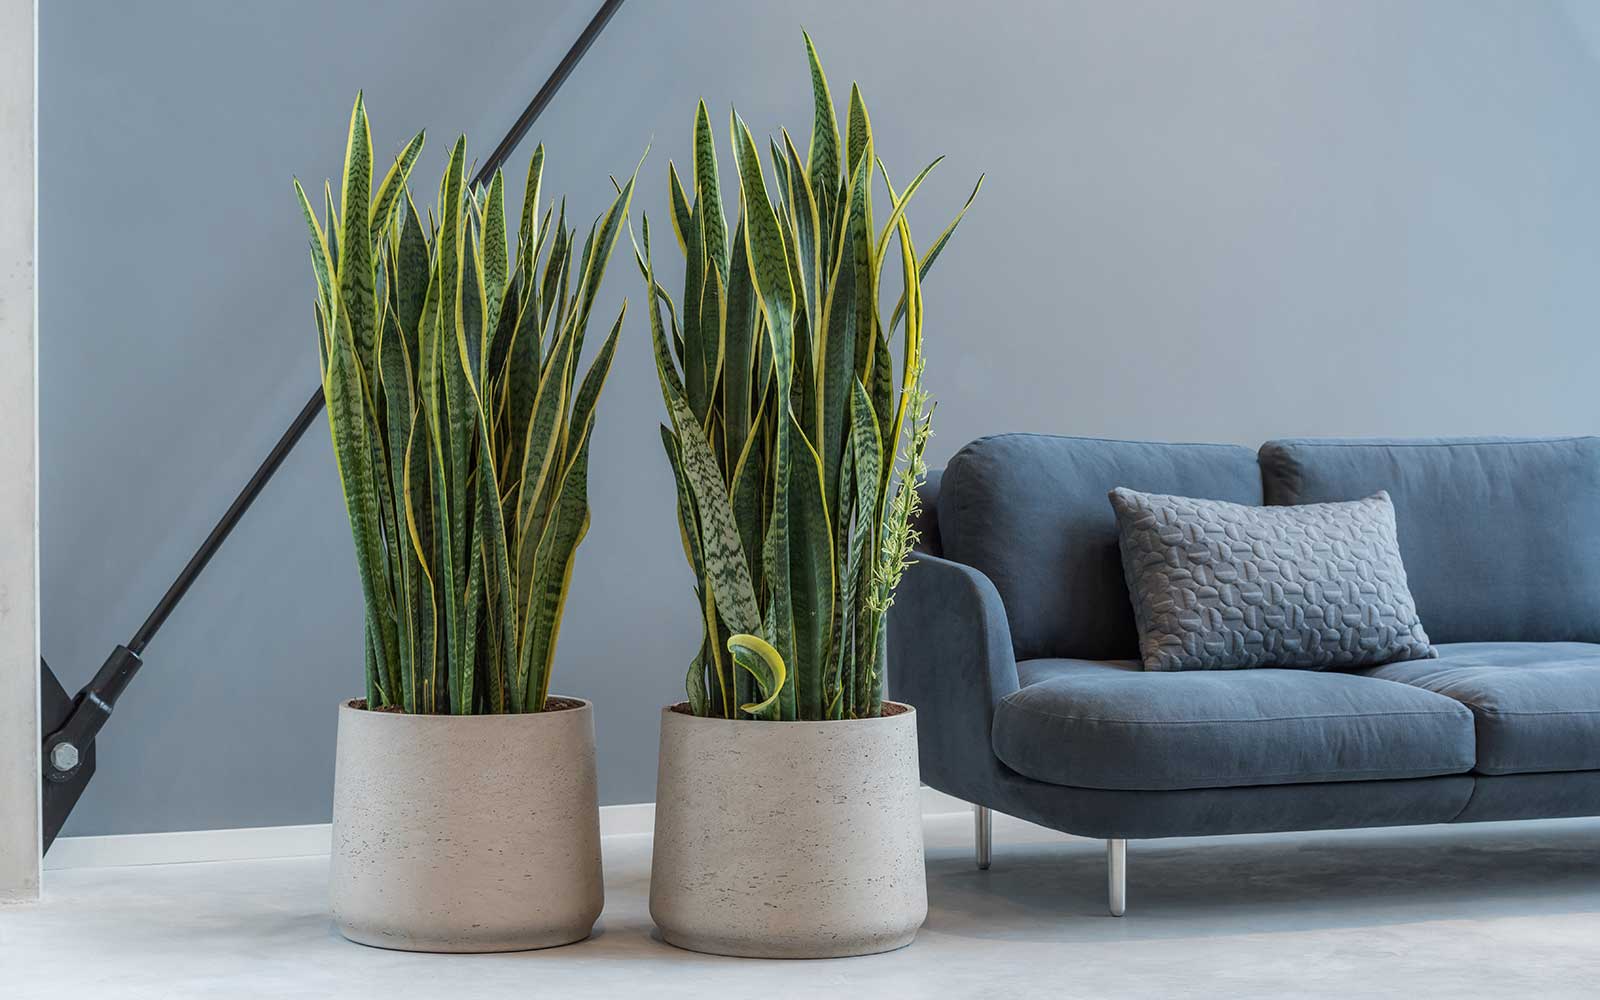 Buy easy care and hard to kill houseplants from Hortology. Robust, resilient and shade tolerant houseplants. Ideal plants for low light settings and the forgetful plant parent.